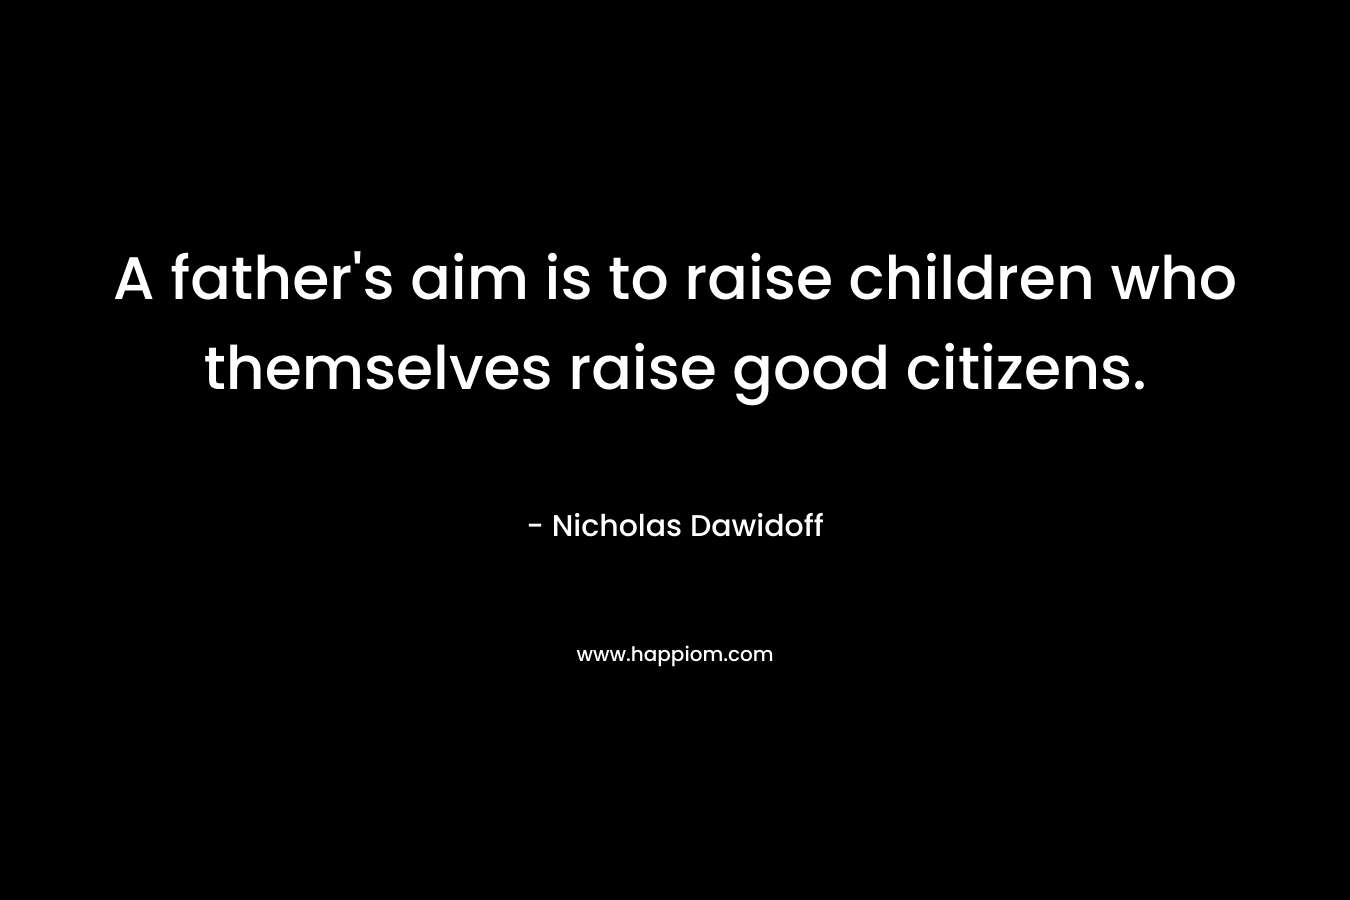 A father's aim is to raise children who themselves raise good citizens.